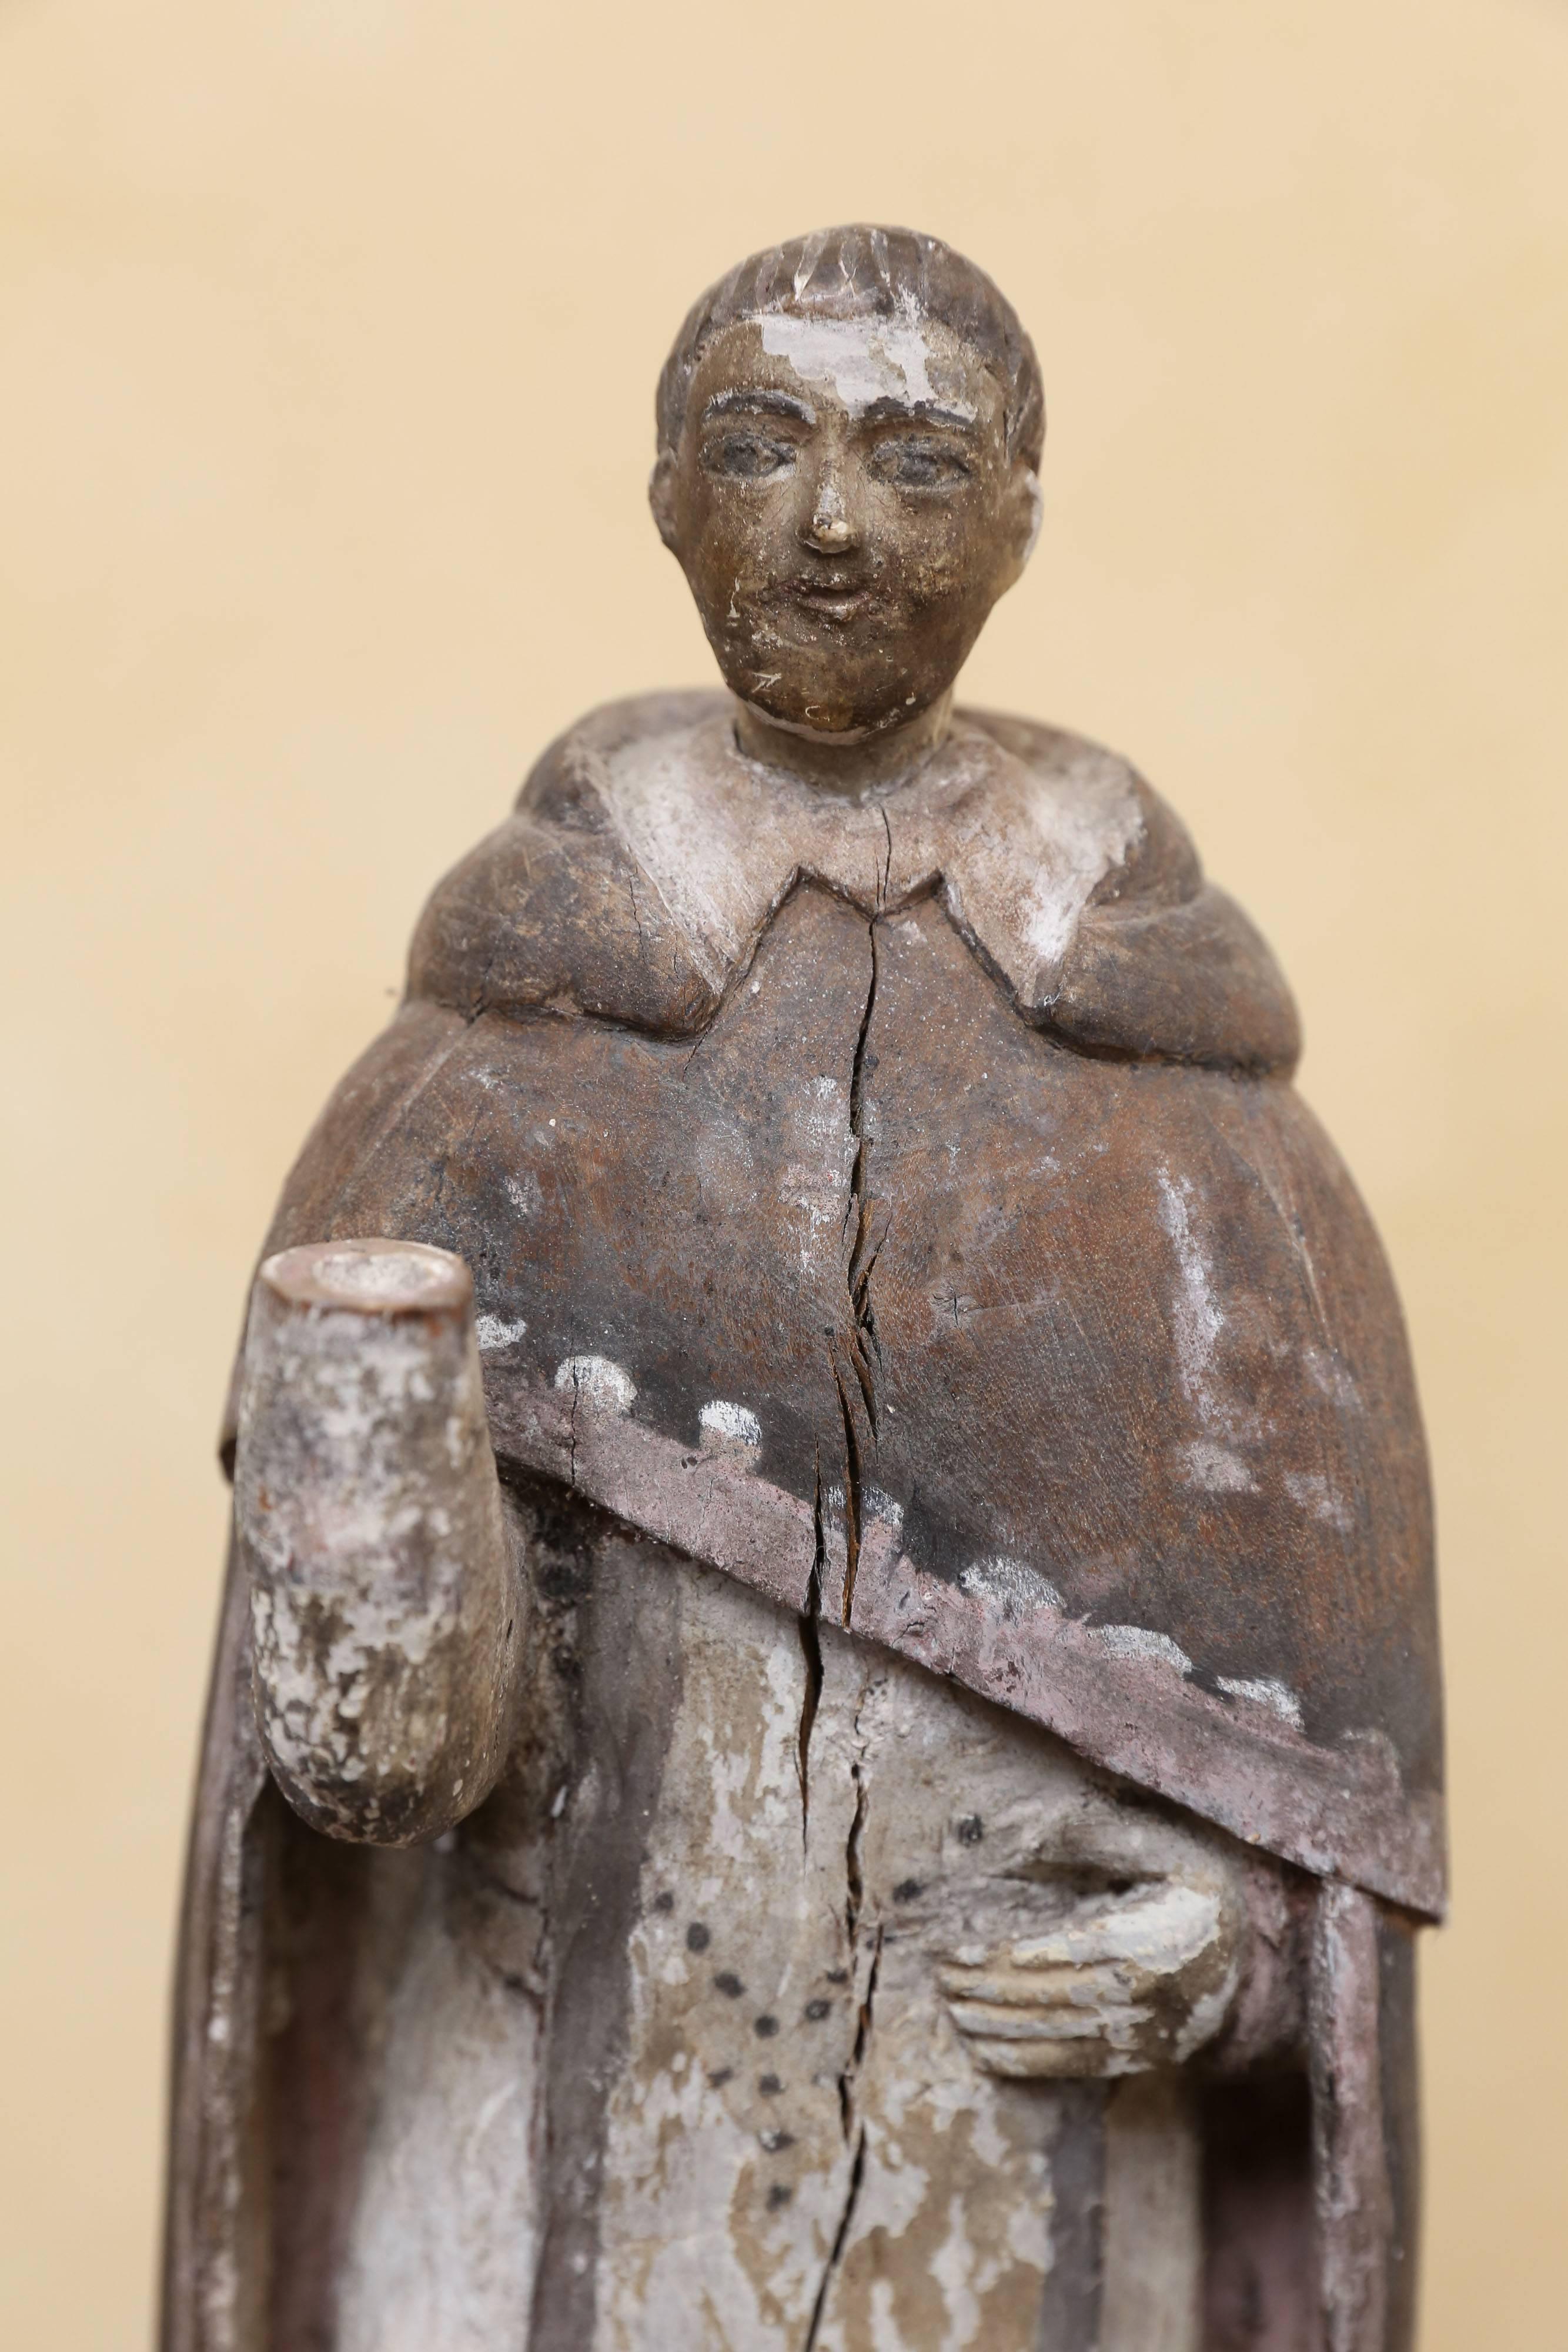 Beautifully carved and painted polychromatic religious figure that resembles St. Francis. Right hand is missing. Figure is bearded and is wearing a monk's cloak. St. Francis is the founder of the Franciscan order. He was born at Assisi, in central